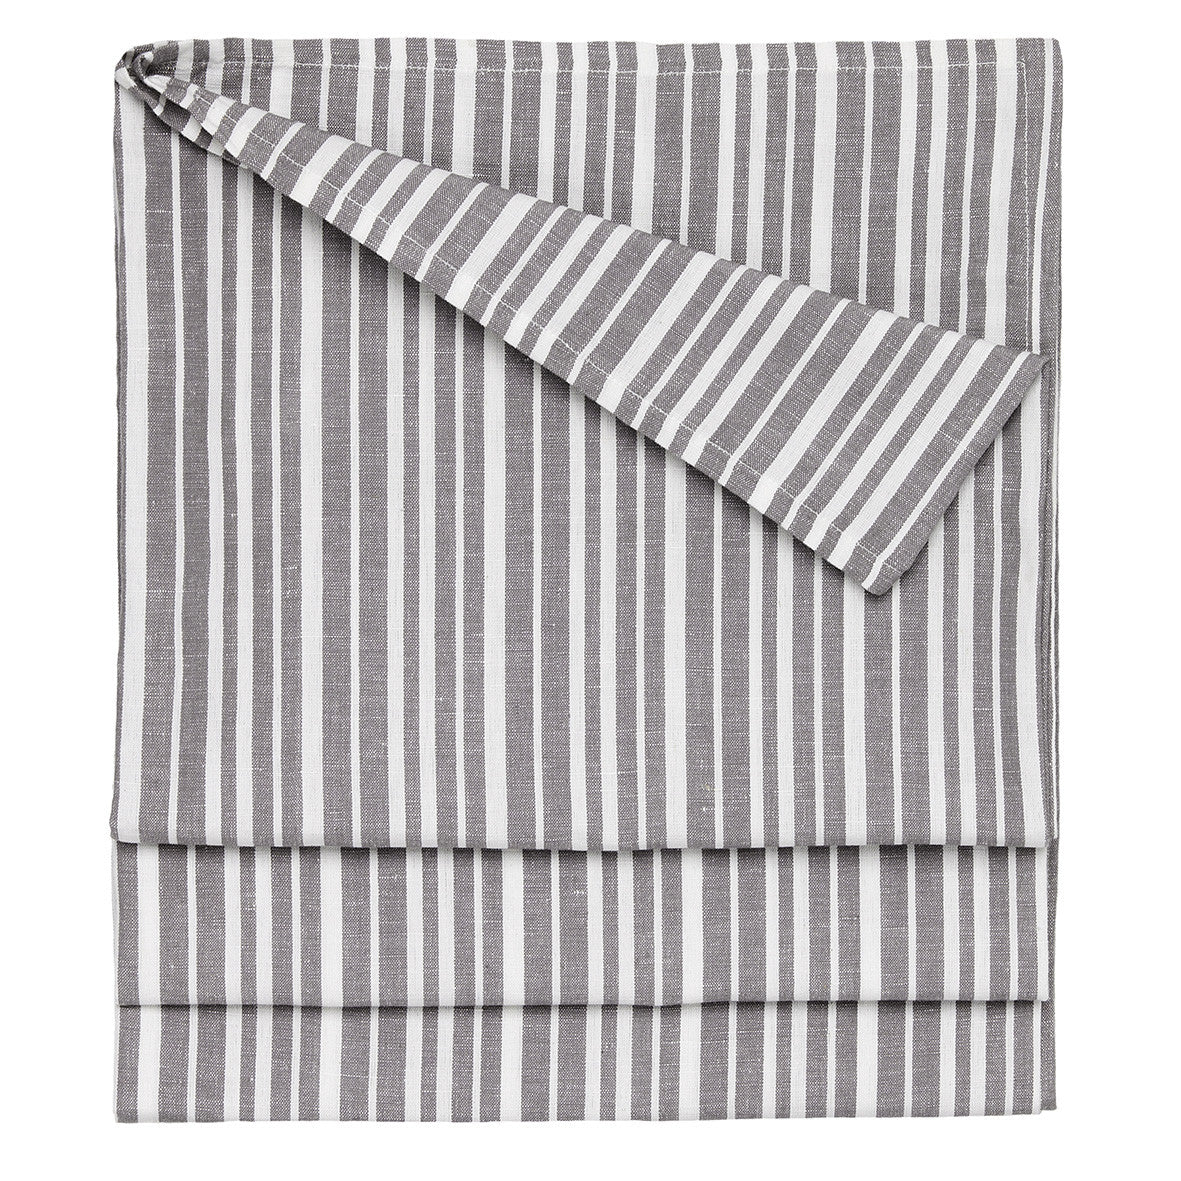 Palermo Ticking Stripe Cotton Linen Tablecloth in Stone Grey Ships from Canada (USA)